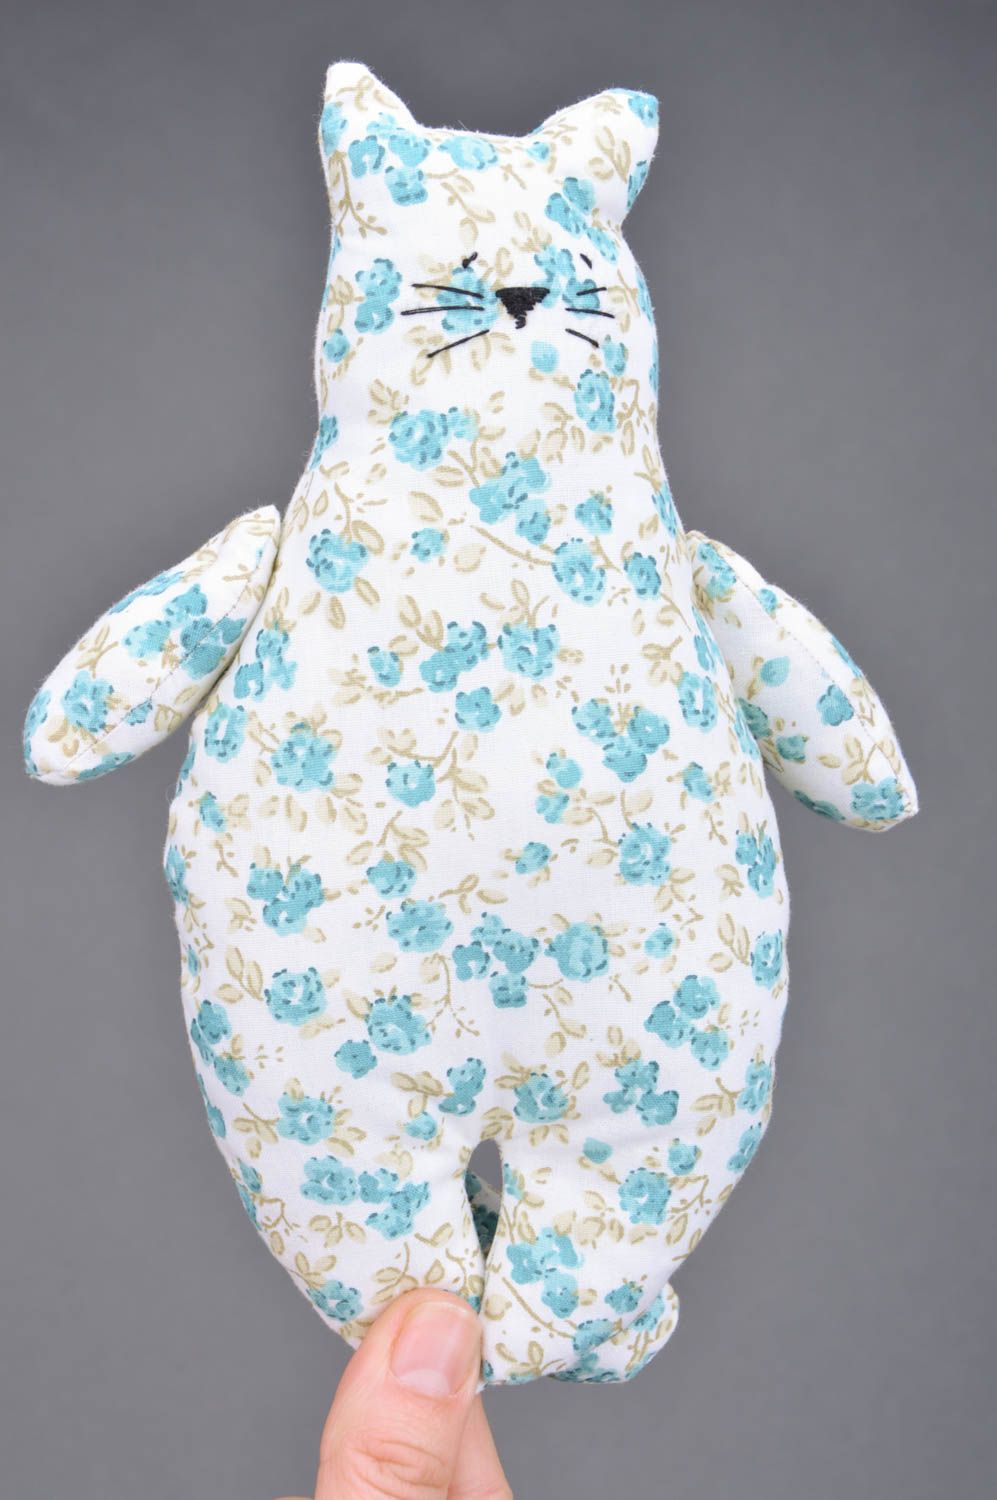 Soft fabric cat made of cotton with flower pattern handmade blue decorative toy photo 3